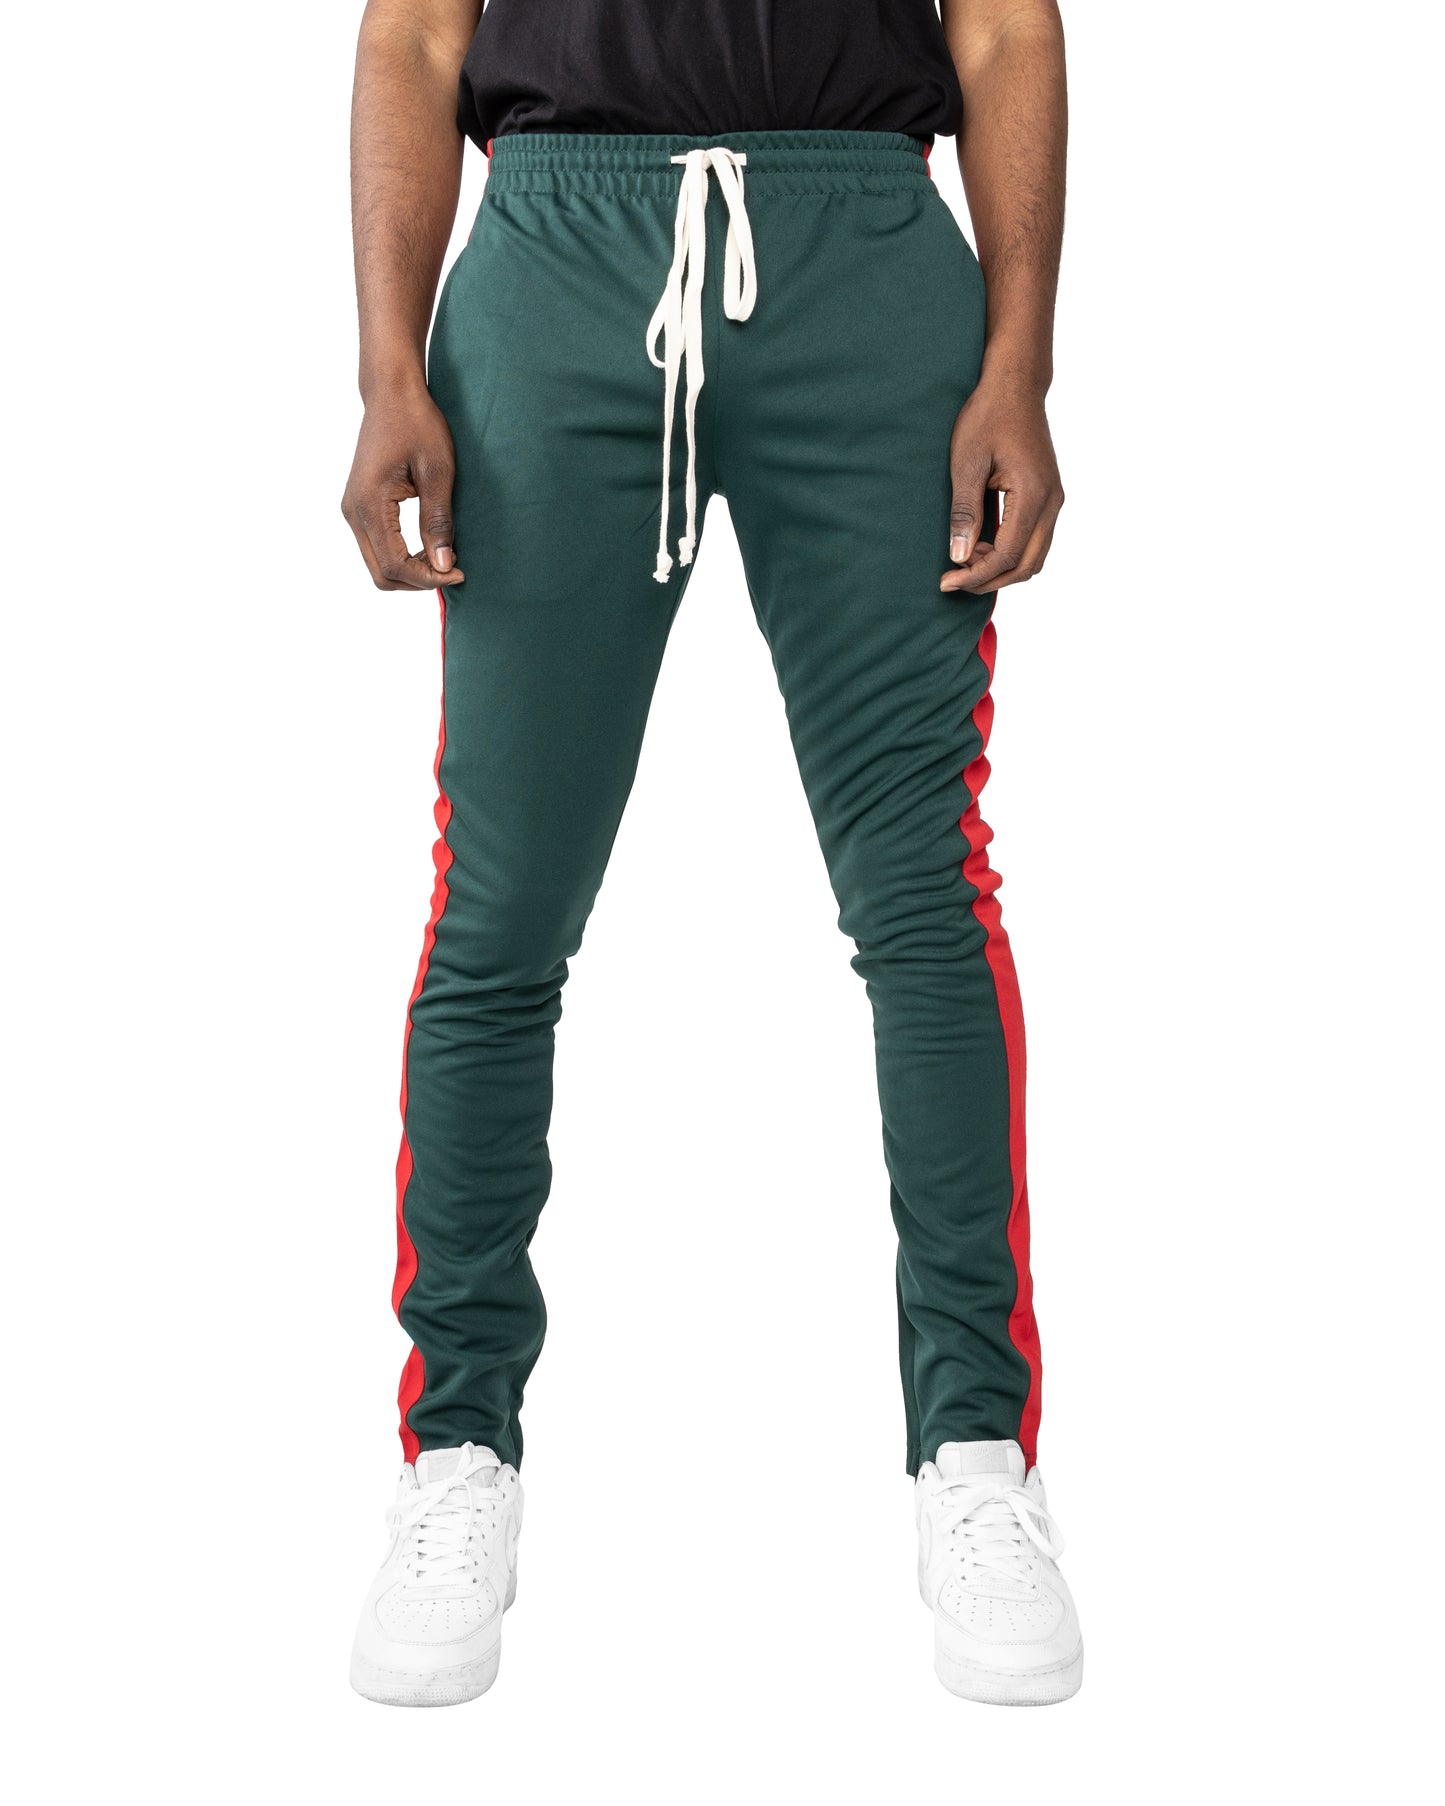 EPTM GREEN/RED-Track Pants